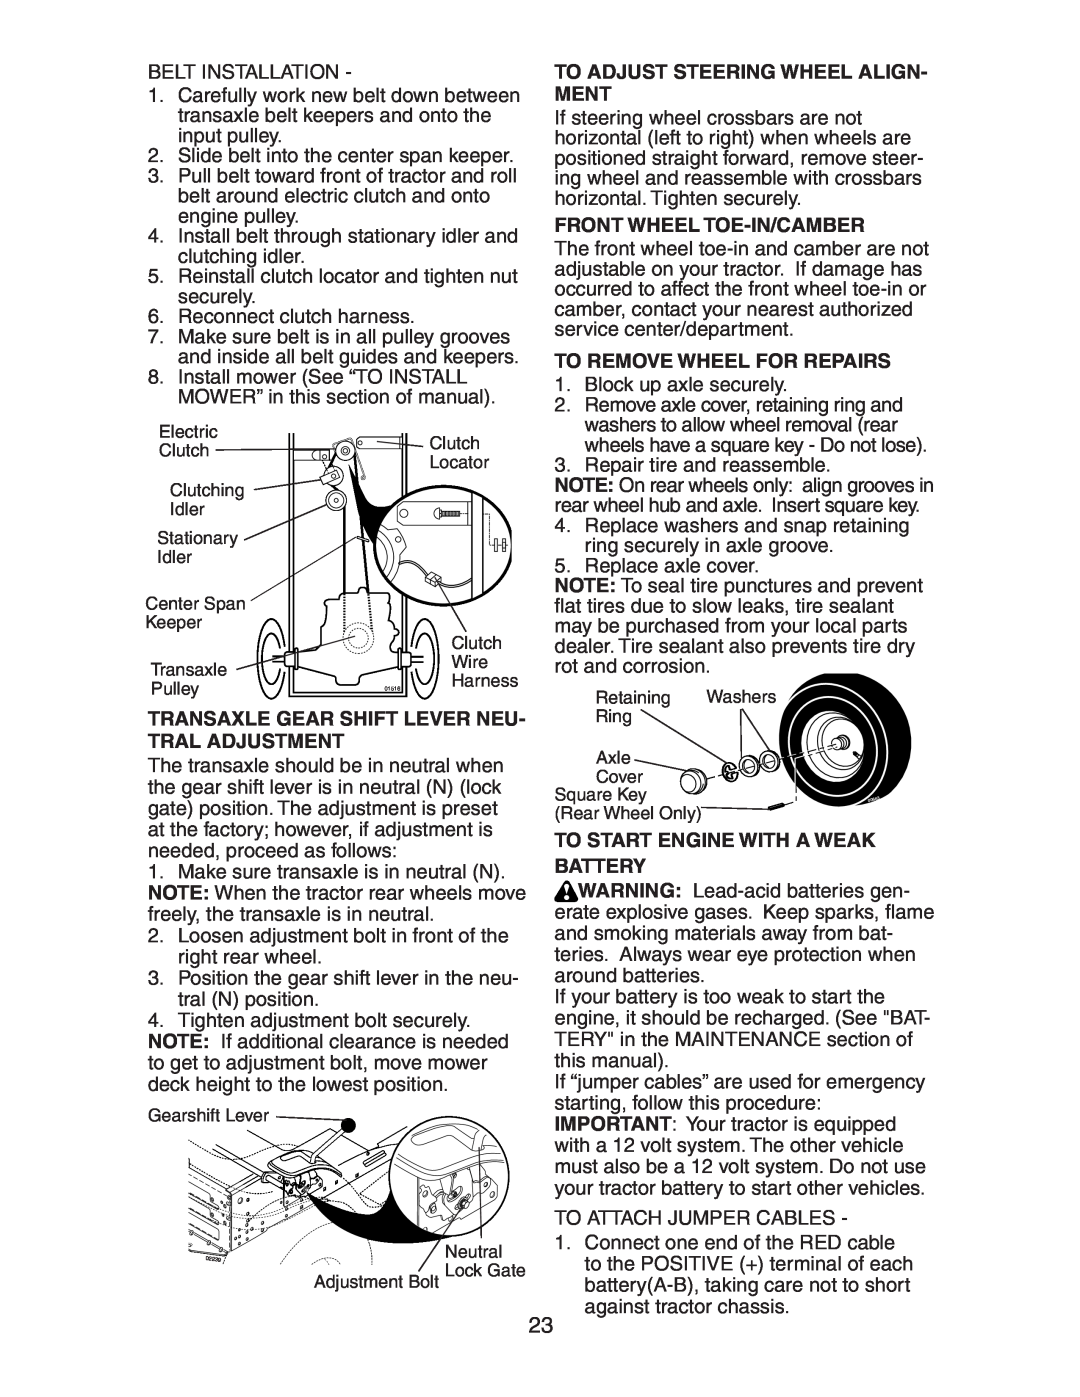 Poulan 192362 manual To Adjust Steering Wheel Align- Ment, Front Wheel Toe-In/Camber, To Remove Wheel For Repairs 